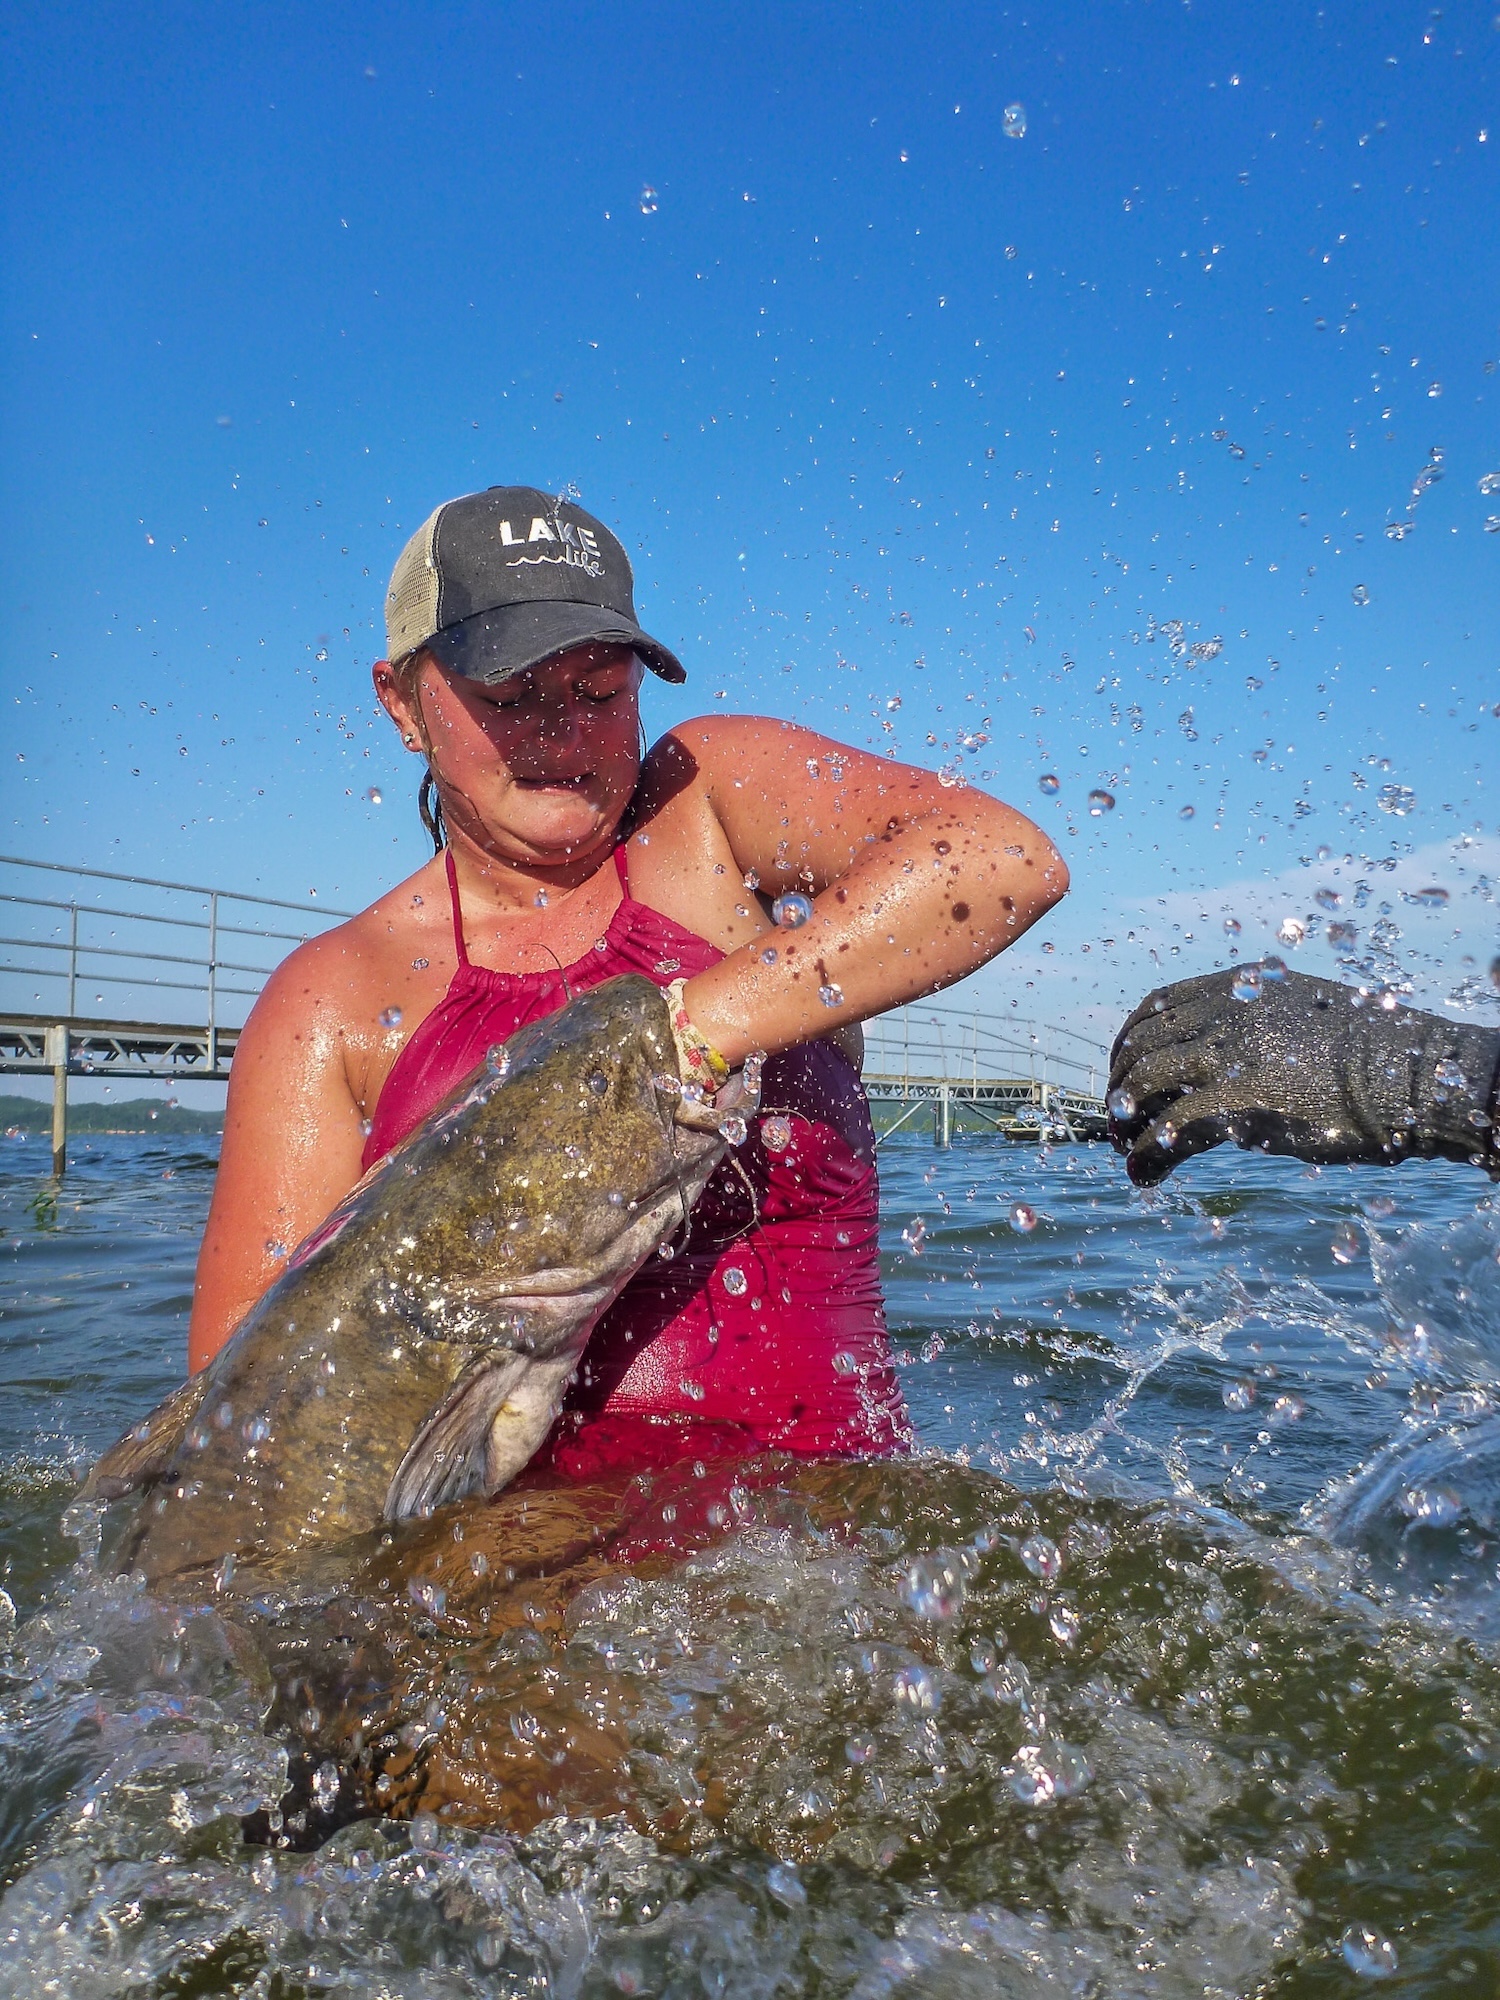 A woman in a pink swimsuit and cap grabs a flathead.